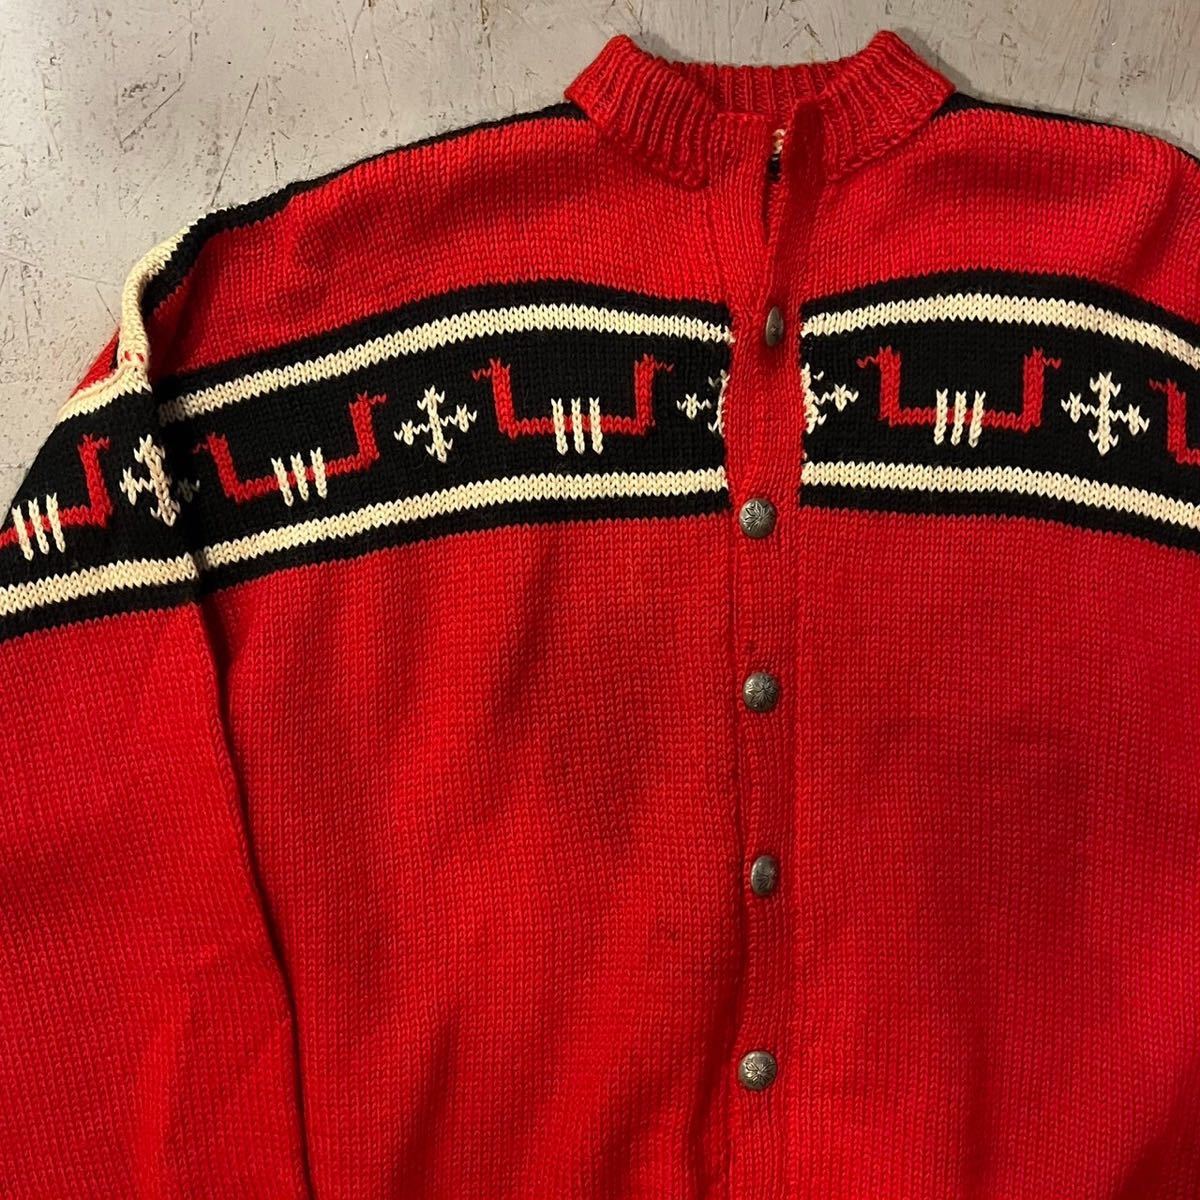  Vintage 60s alpaca nordic pattern cardigan M degree wool red hand knitted Conti . metal button couch n sweater 50s 70s